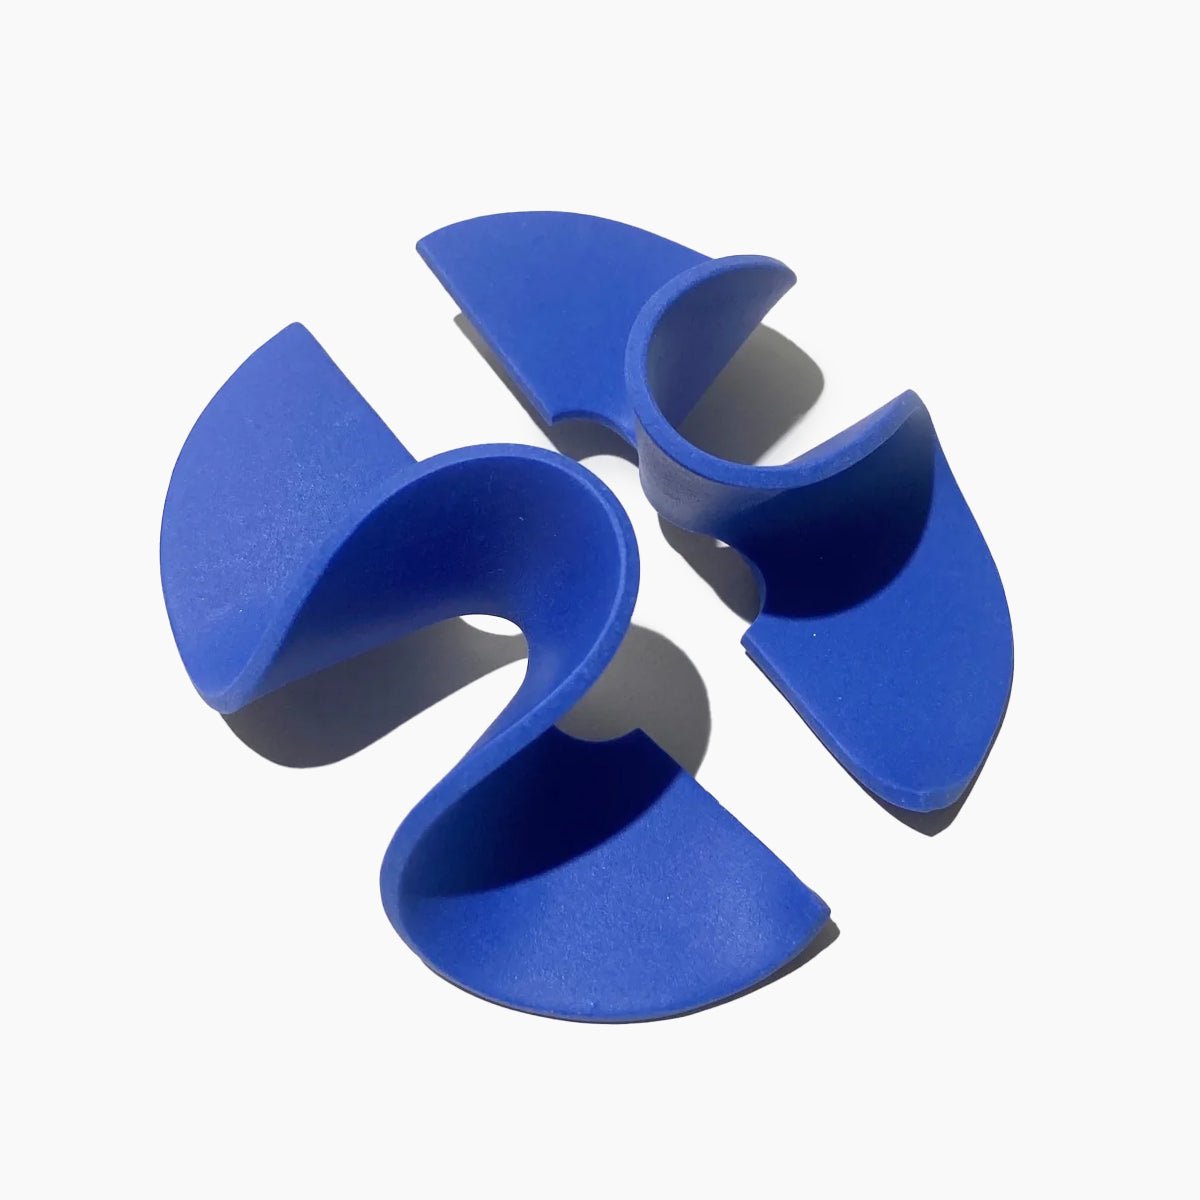 A wide band polymer clay stud earring in a wave design. The Modern Wave Earrings in Blue are designed and handcrafted by Little Pieces Jewelry in Los Angeles, California.